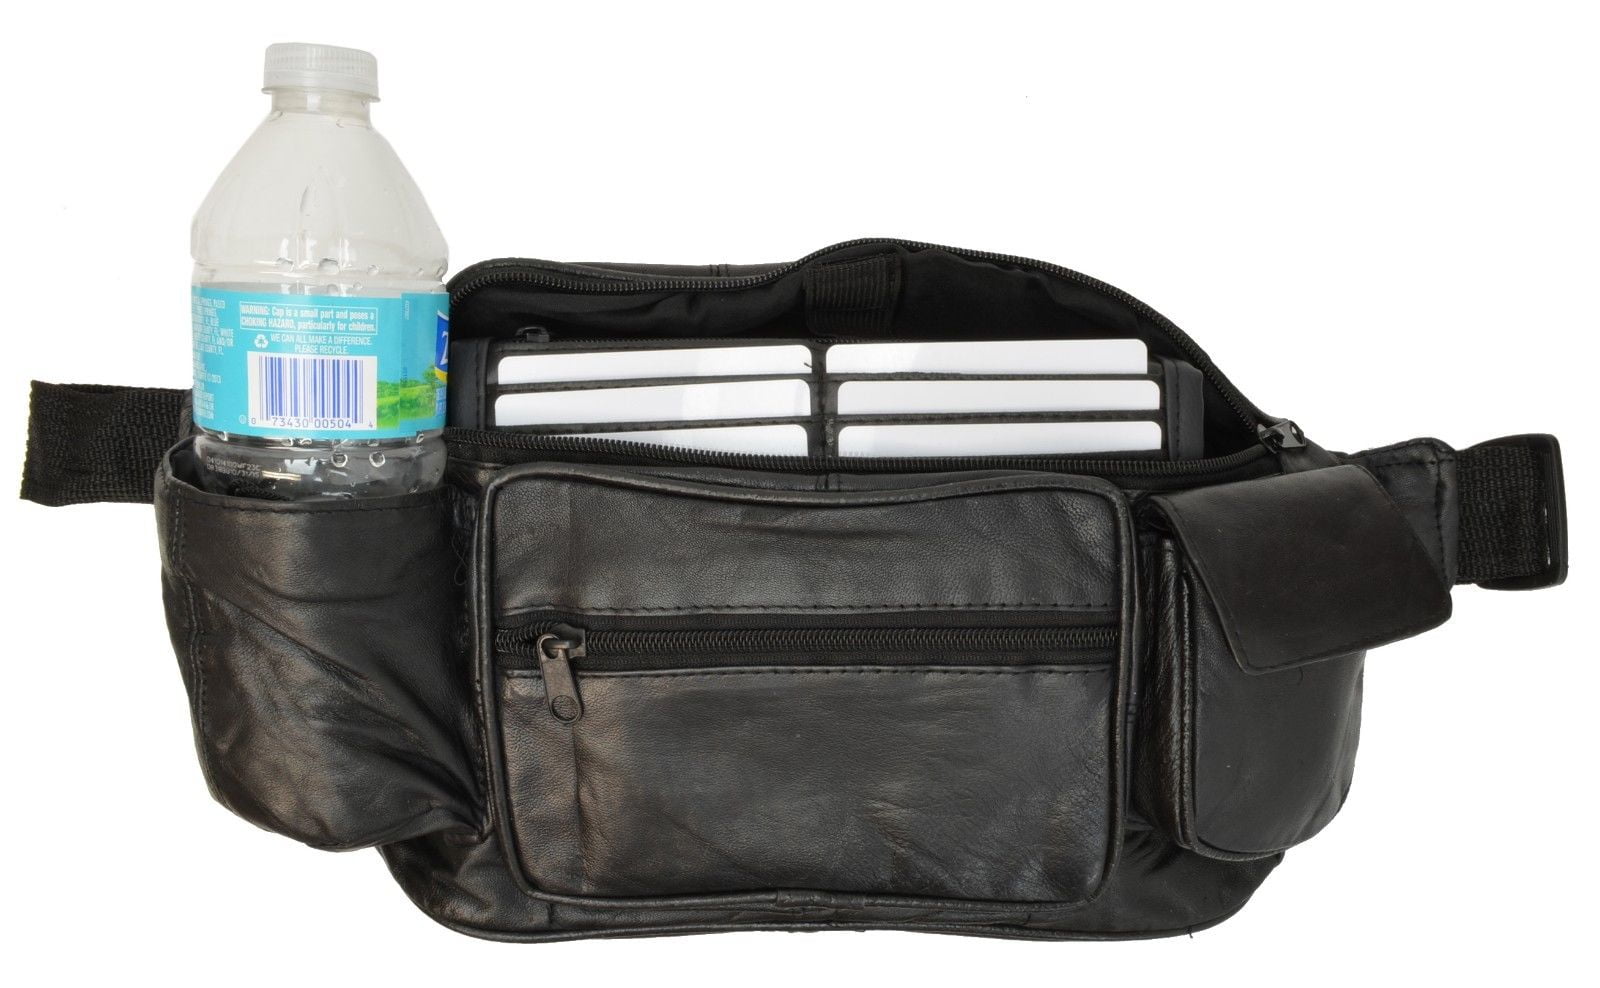 Leatherboss Jumbo Fanny pack with water bottle holder and side pocket ...